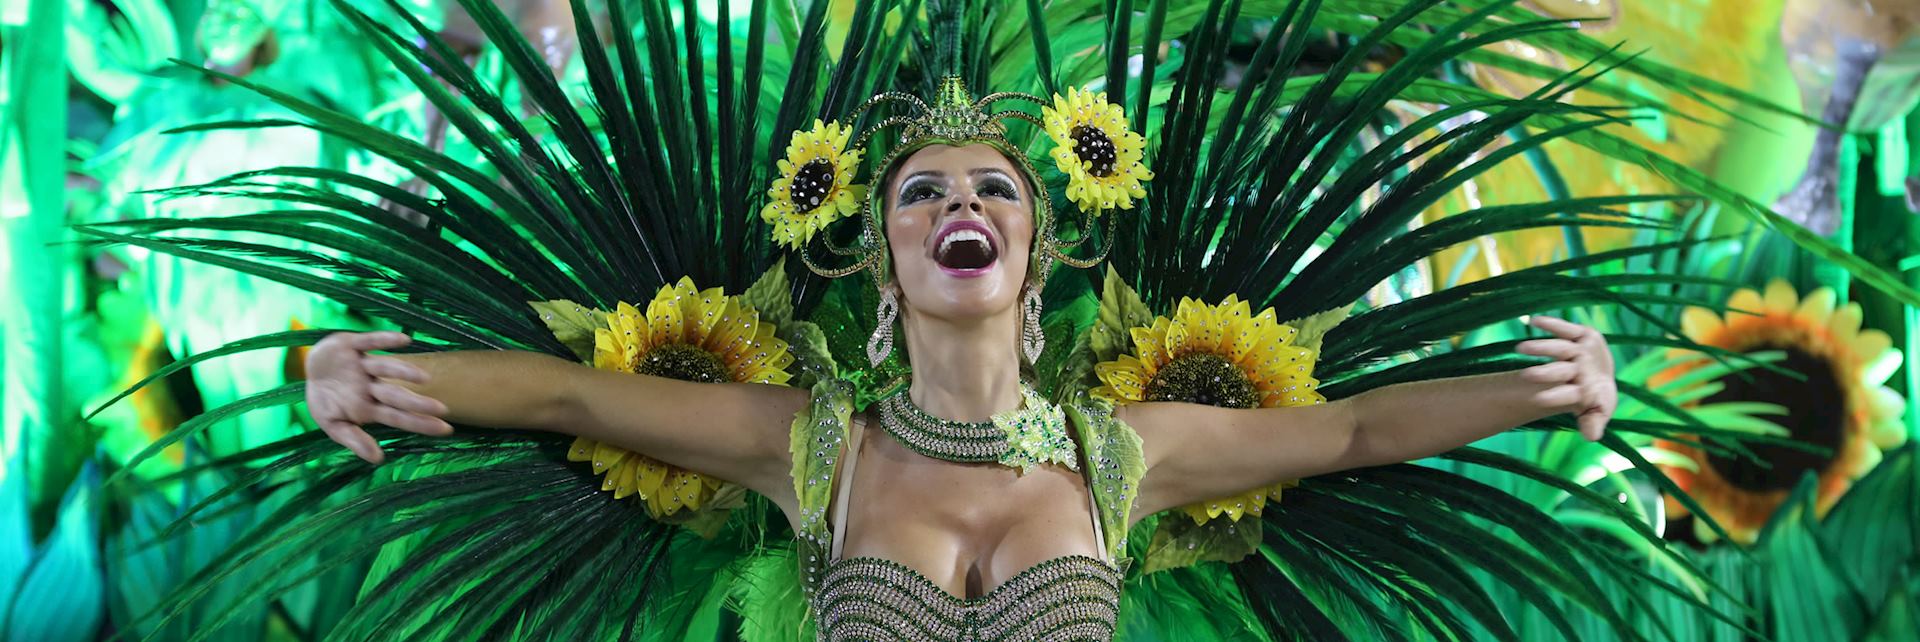 Carnival In Brazil: When, Where & How To Celebrate - Rainforest Cruises